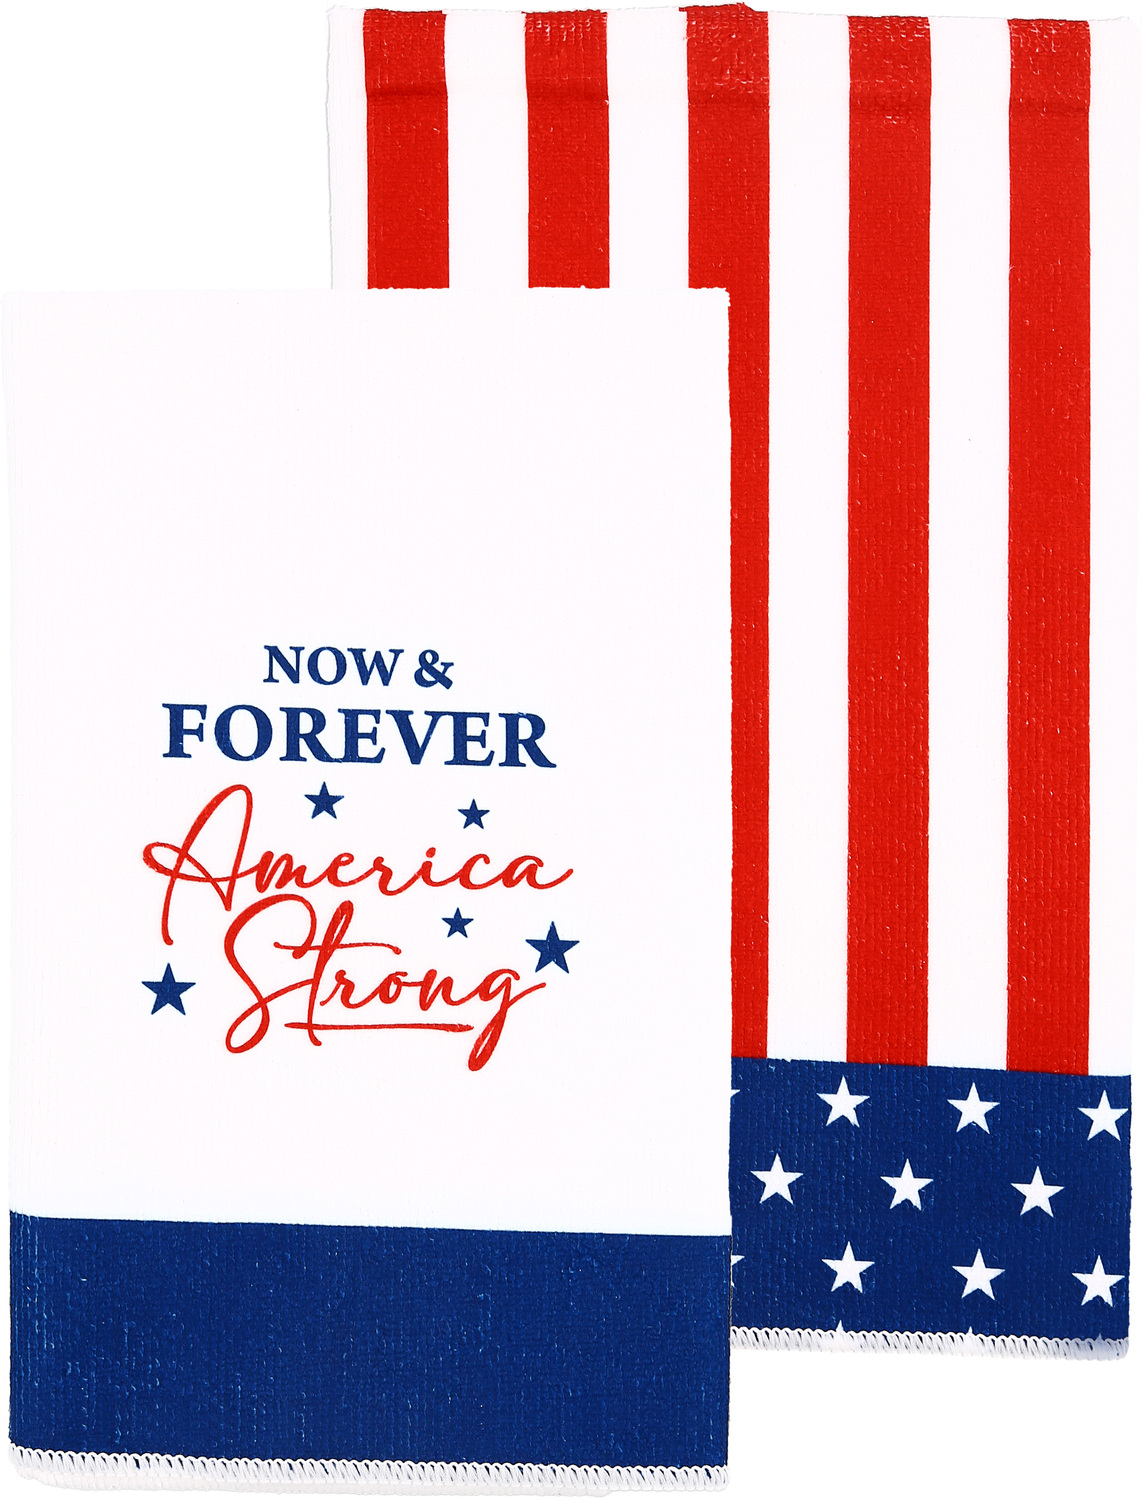 America Strong by Red, White, & Blue Crew - America Strong - Tea Towel Gift Set (2 - 19.75" x 27.5")